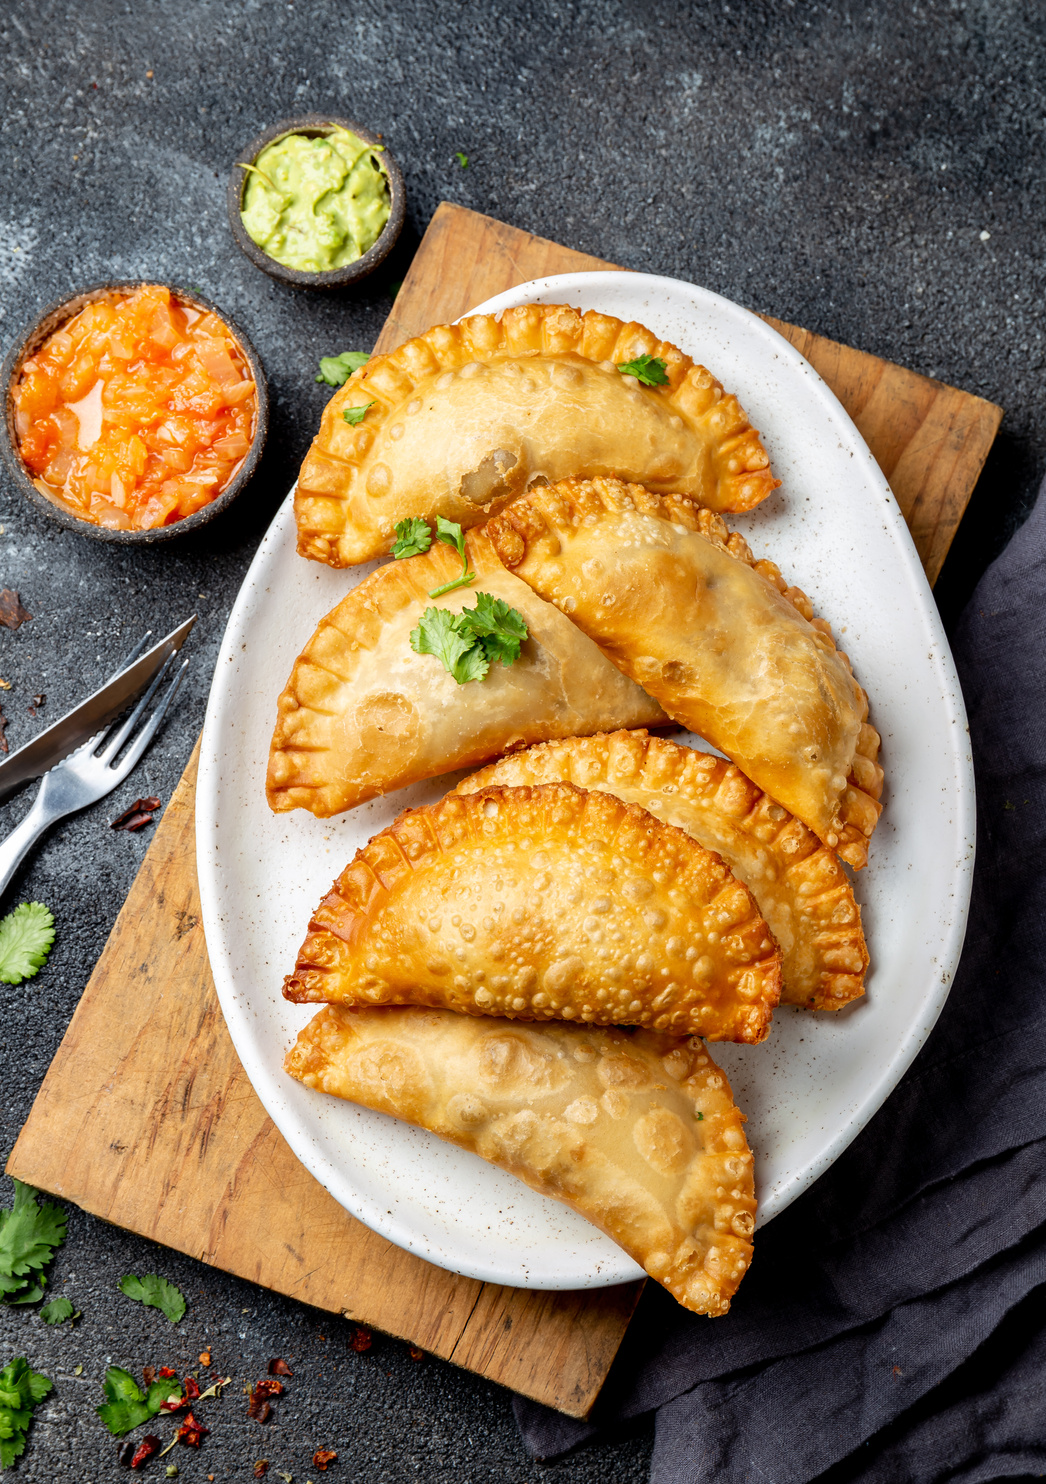 Latin American Fried Empanadas with Tomato and Avocado Sauces. Top View